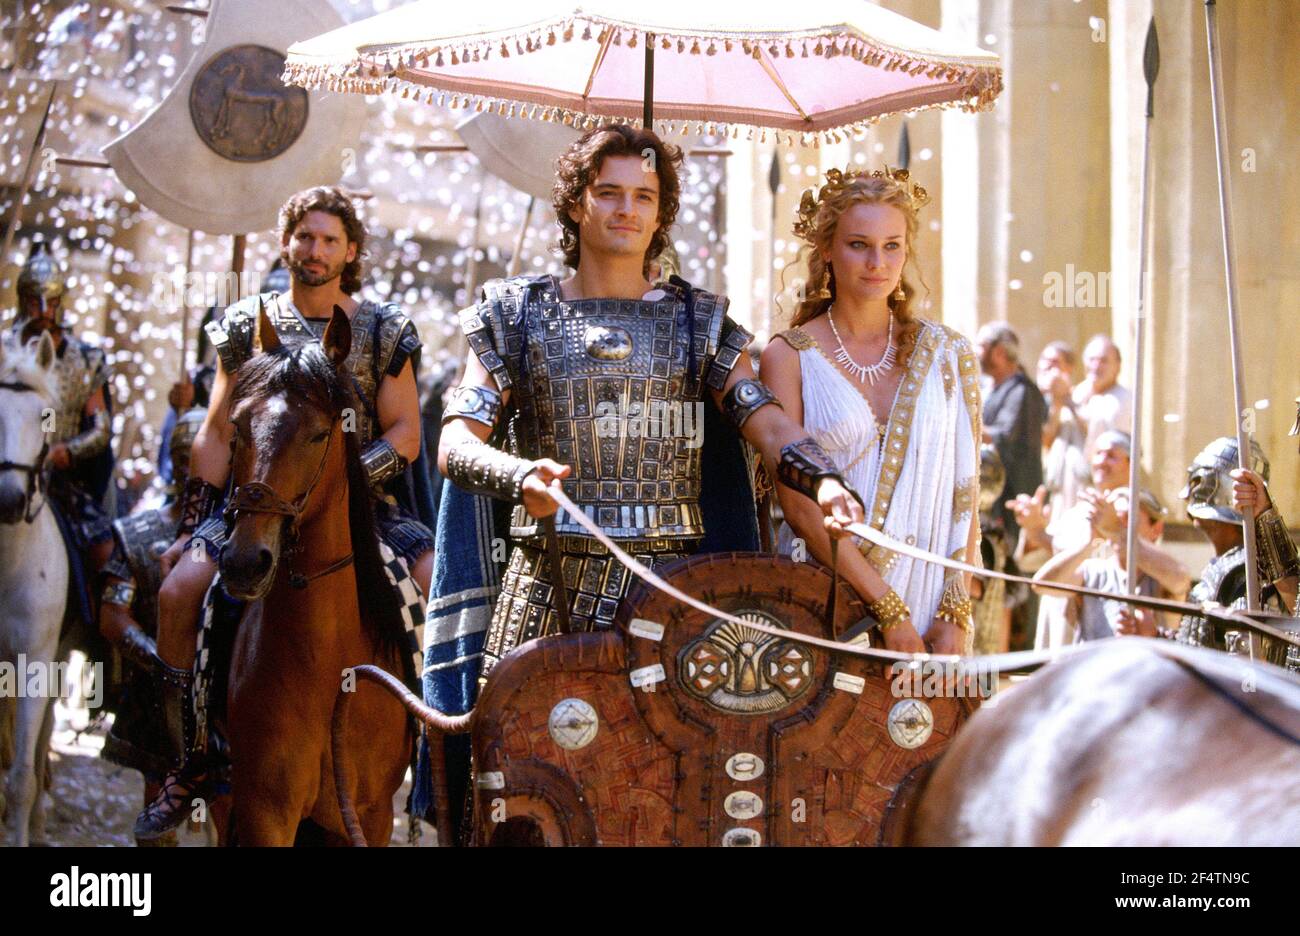 ERIC BANA, ORLANDO BLOOM and DIANE KRUGER in TROY (2004), directed by  WOLFGANG PETERSEN. Credit: WARNER BROS. / BAILEY, ALEX / Album Stock Photo  - Alamy